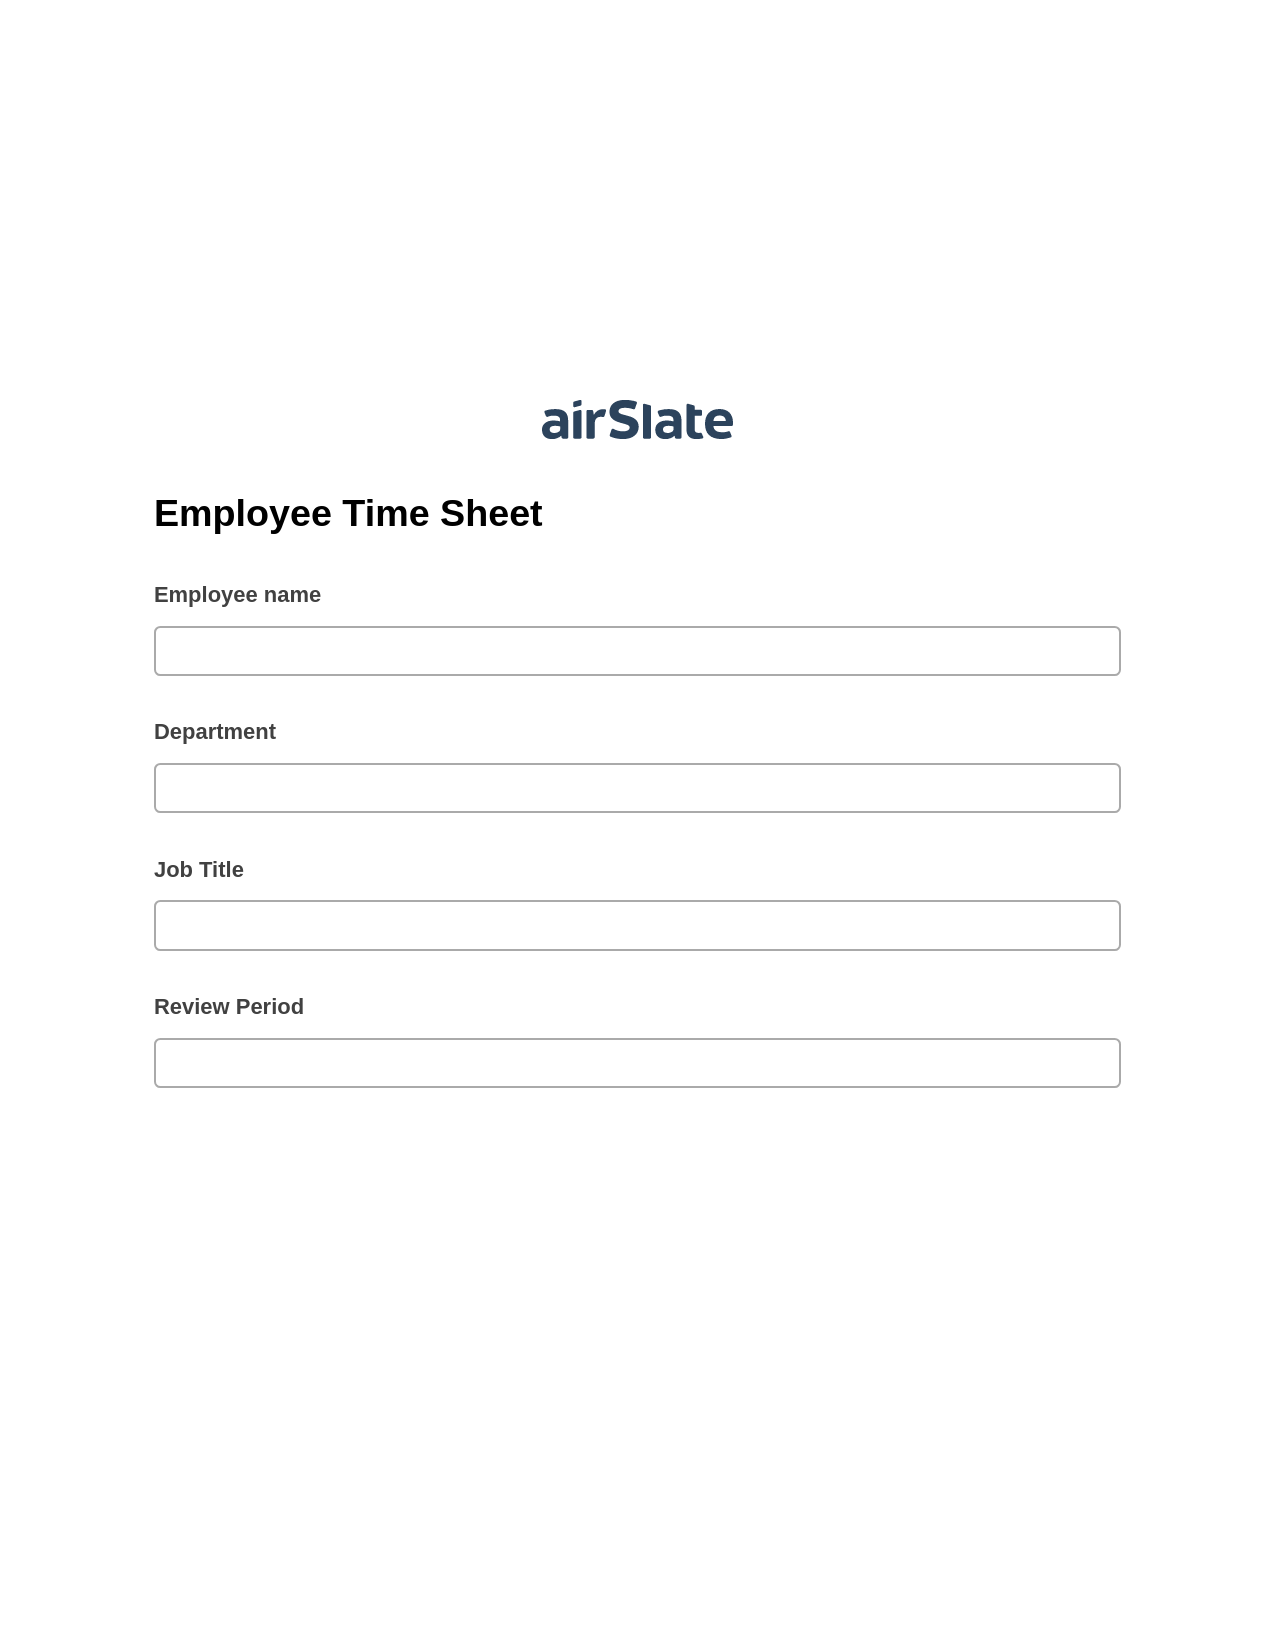 Employee Time Sheet Pre-fill from Salesforce Records Bot, Slack Notification Bot, Archive to Dropbox Bot